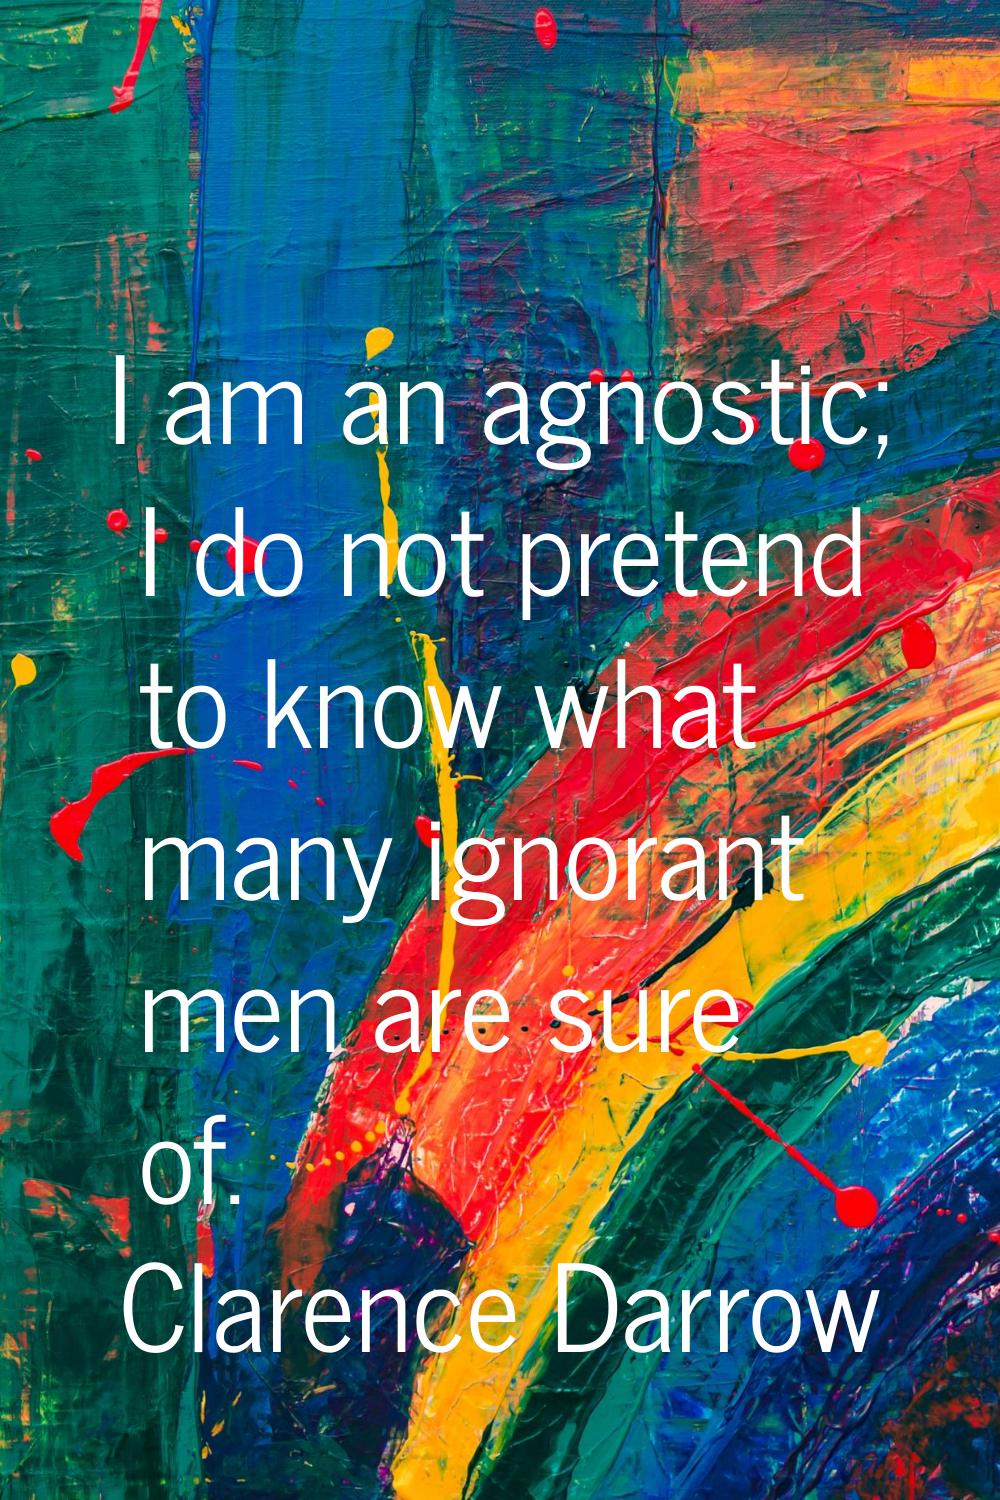 I am an agnostic; I do not pretend to know what many ignorant men are sure of.